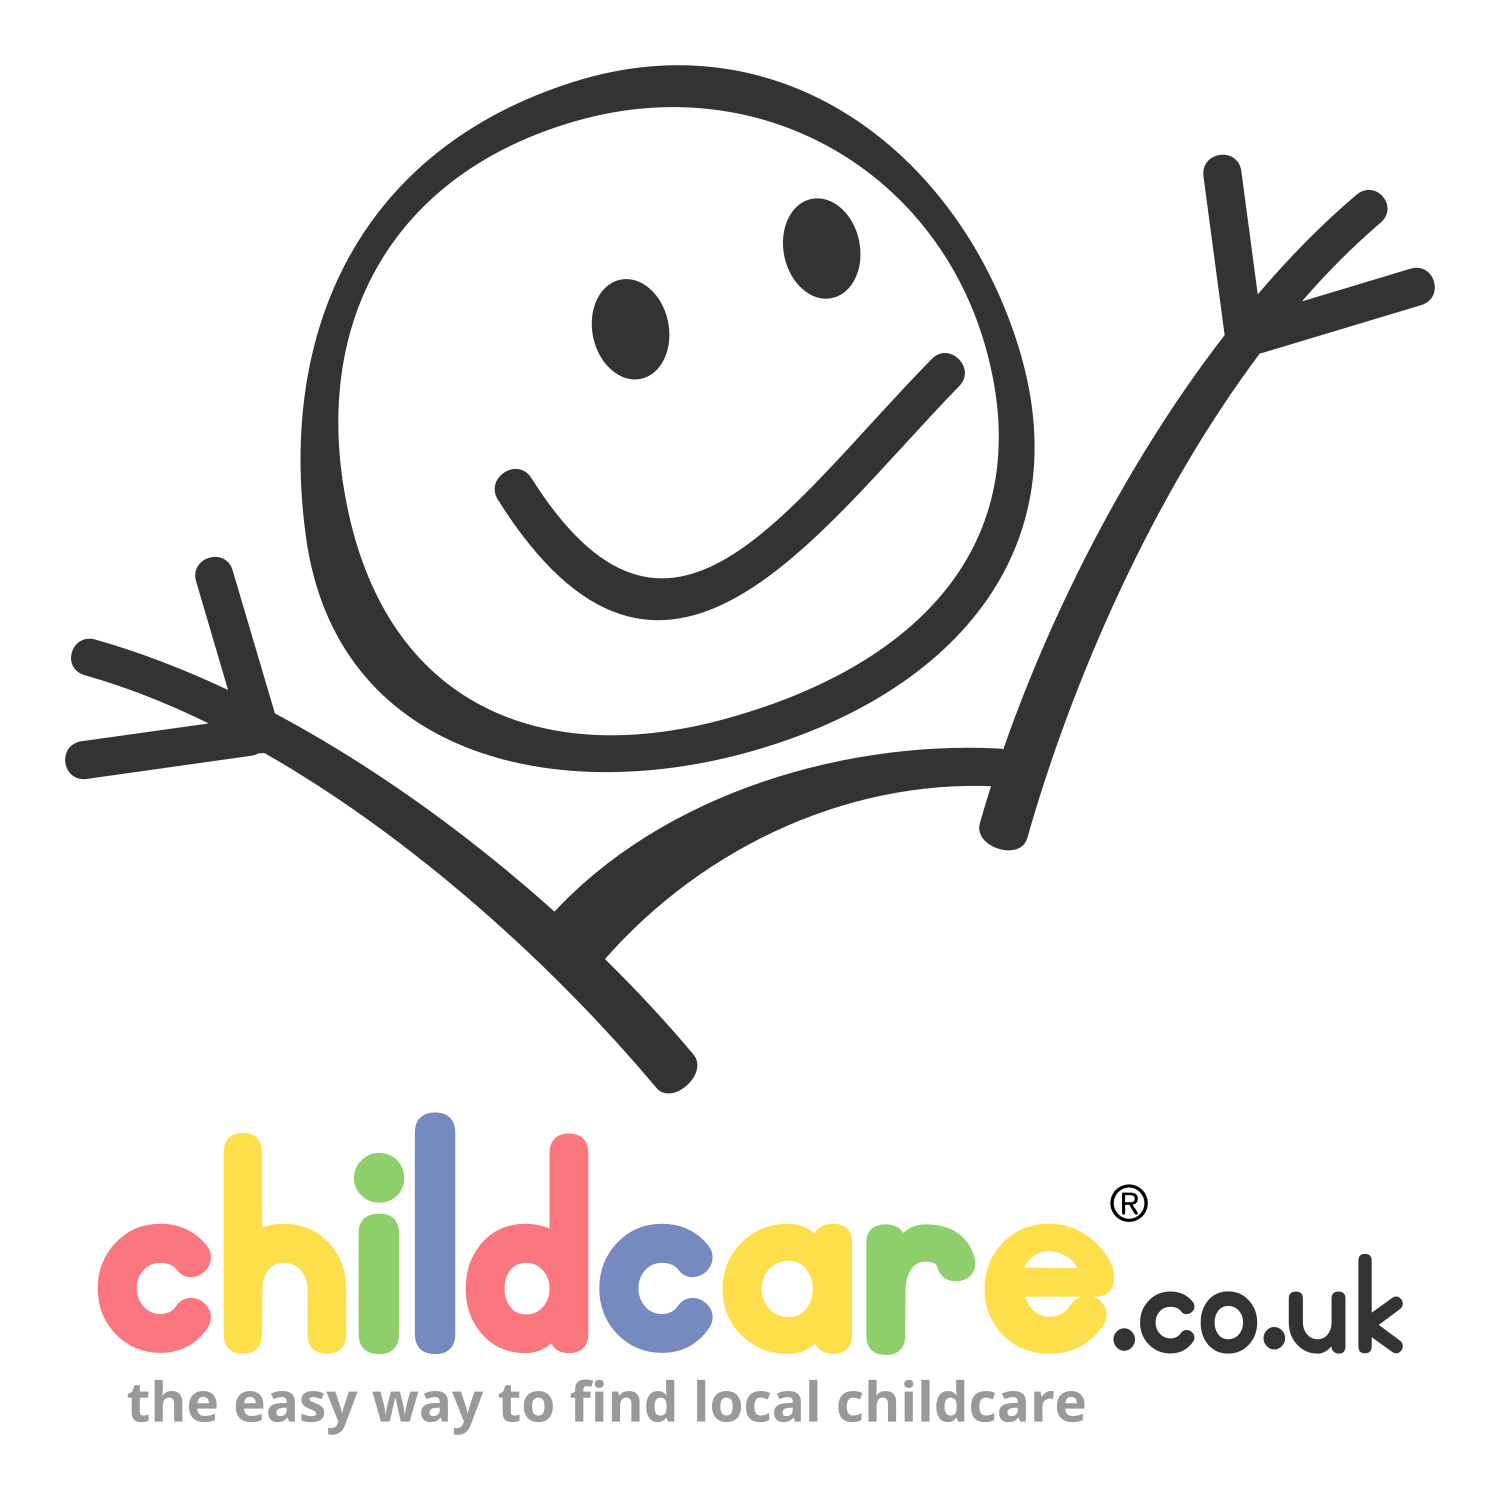 https://www.childcare.co.uk/resources/images/childcare_white_1500x1500.png